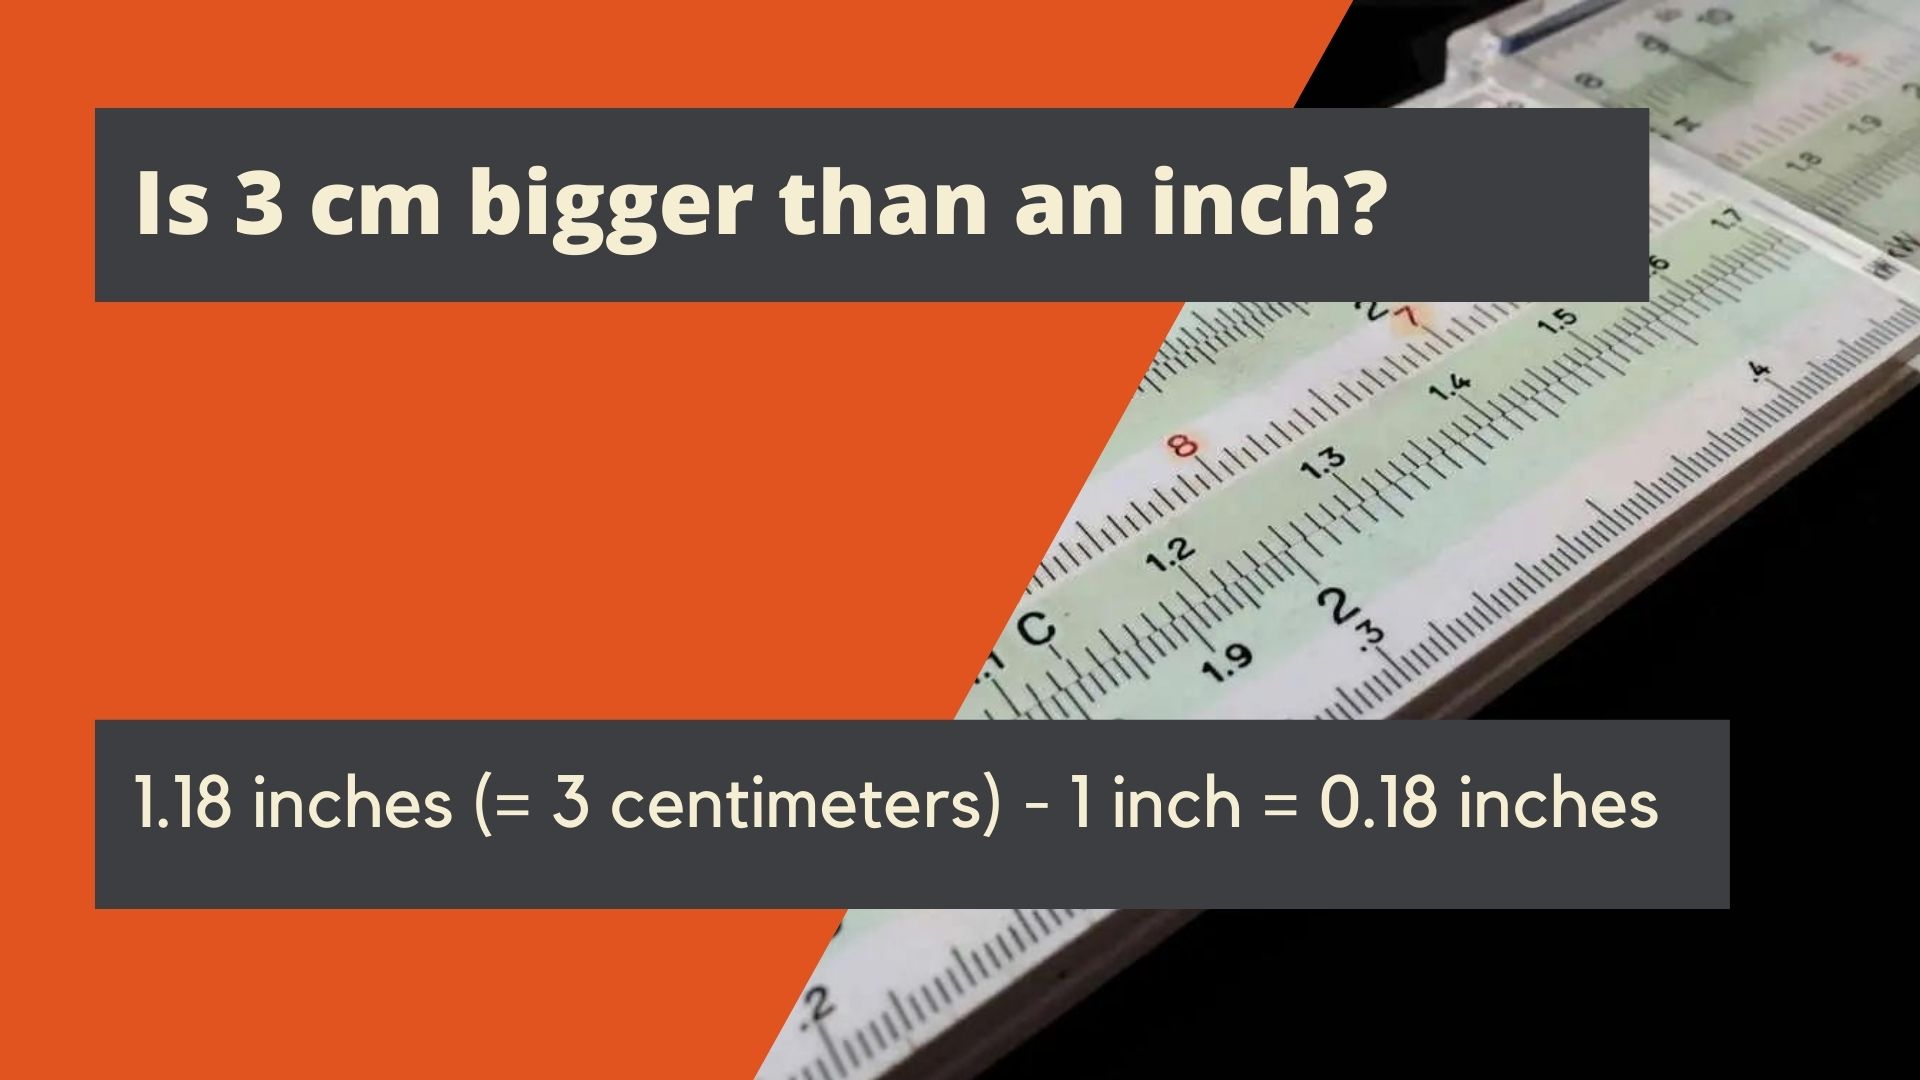 Is 3 cm bigger than an inch?